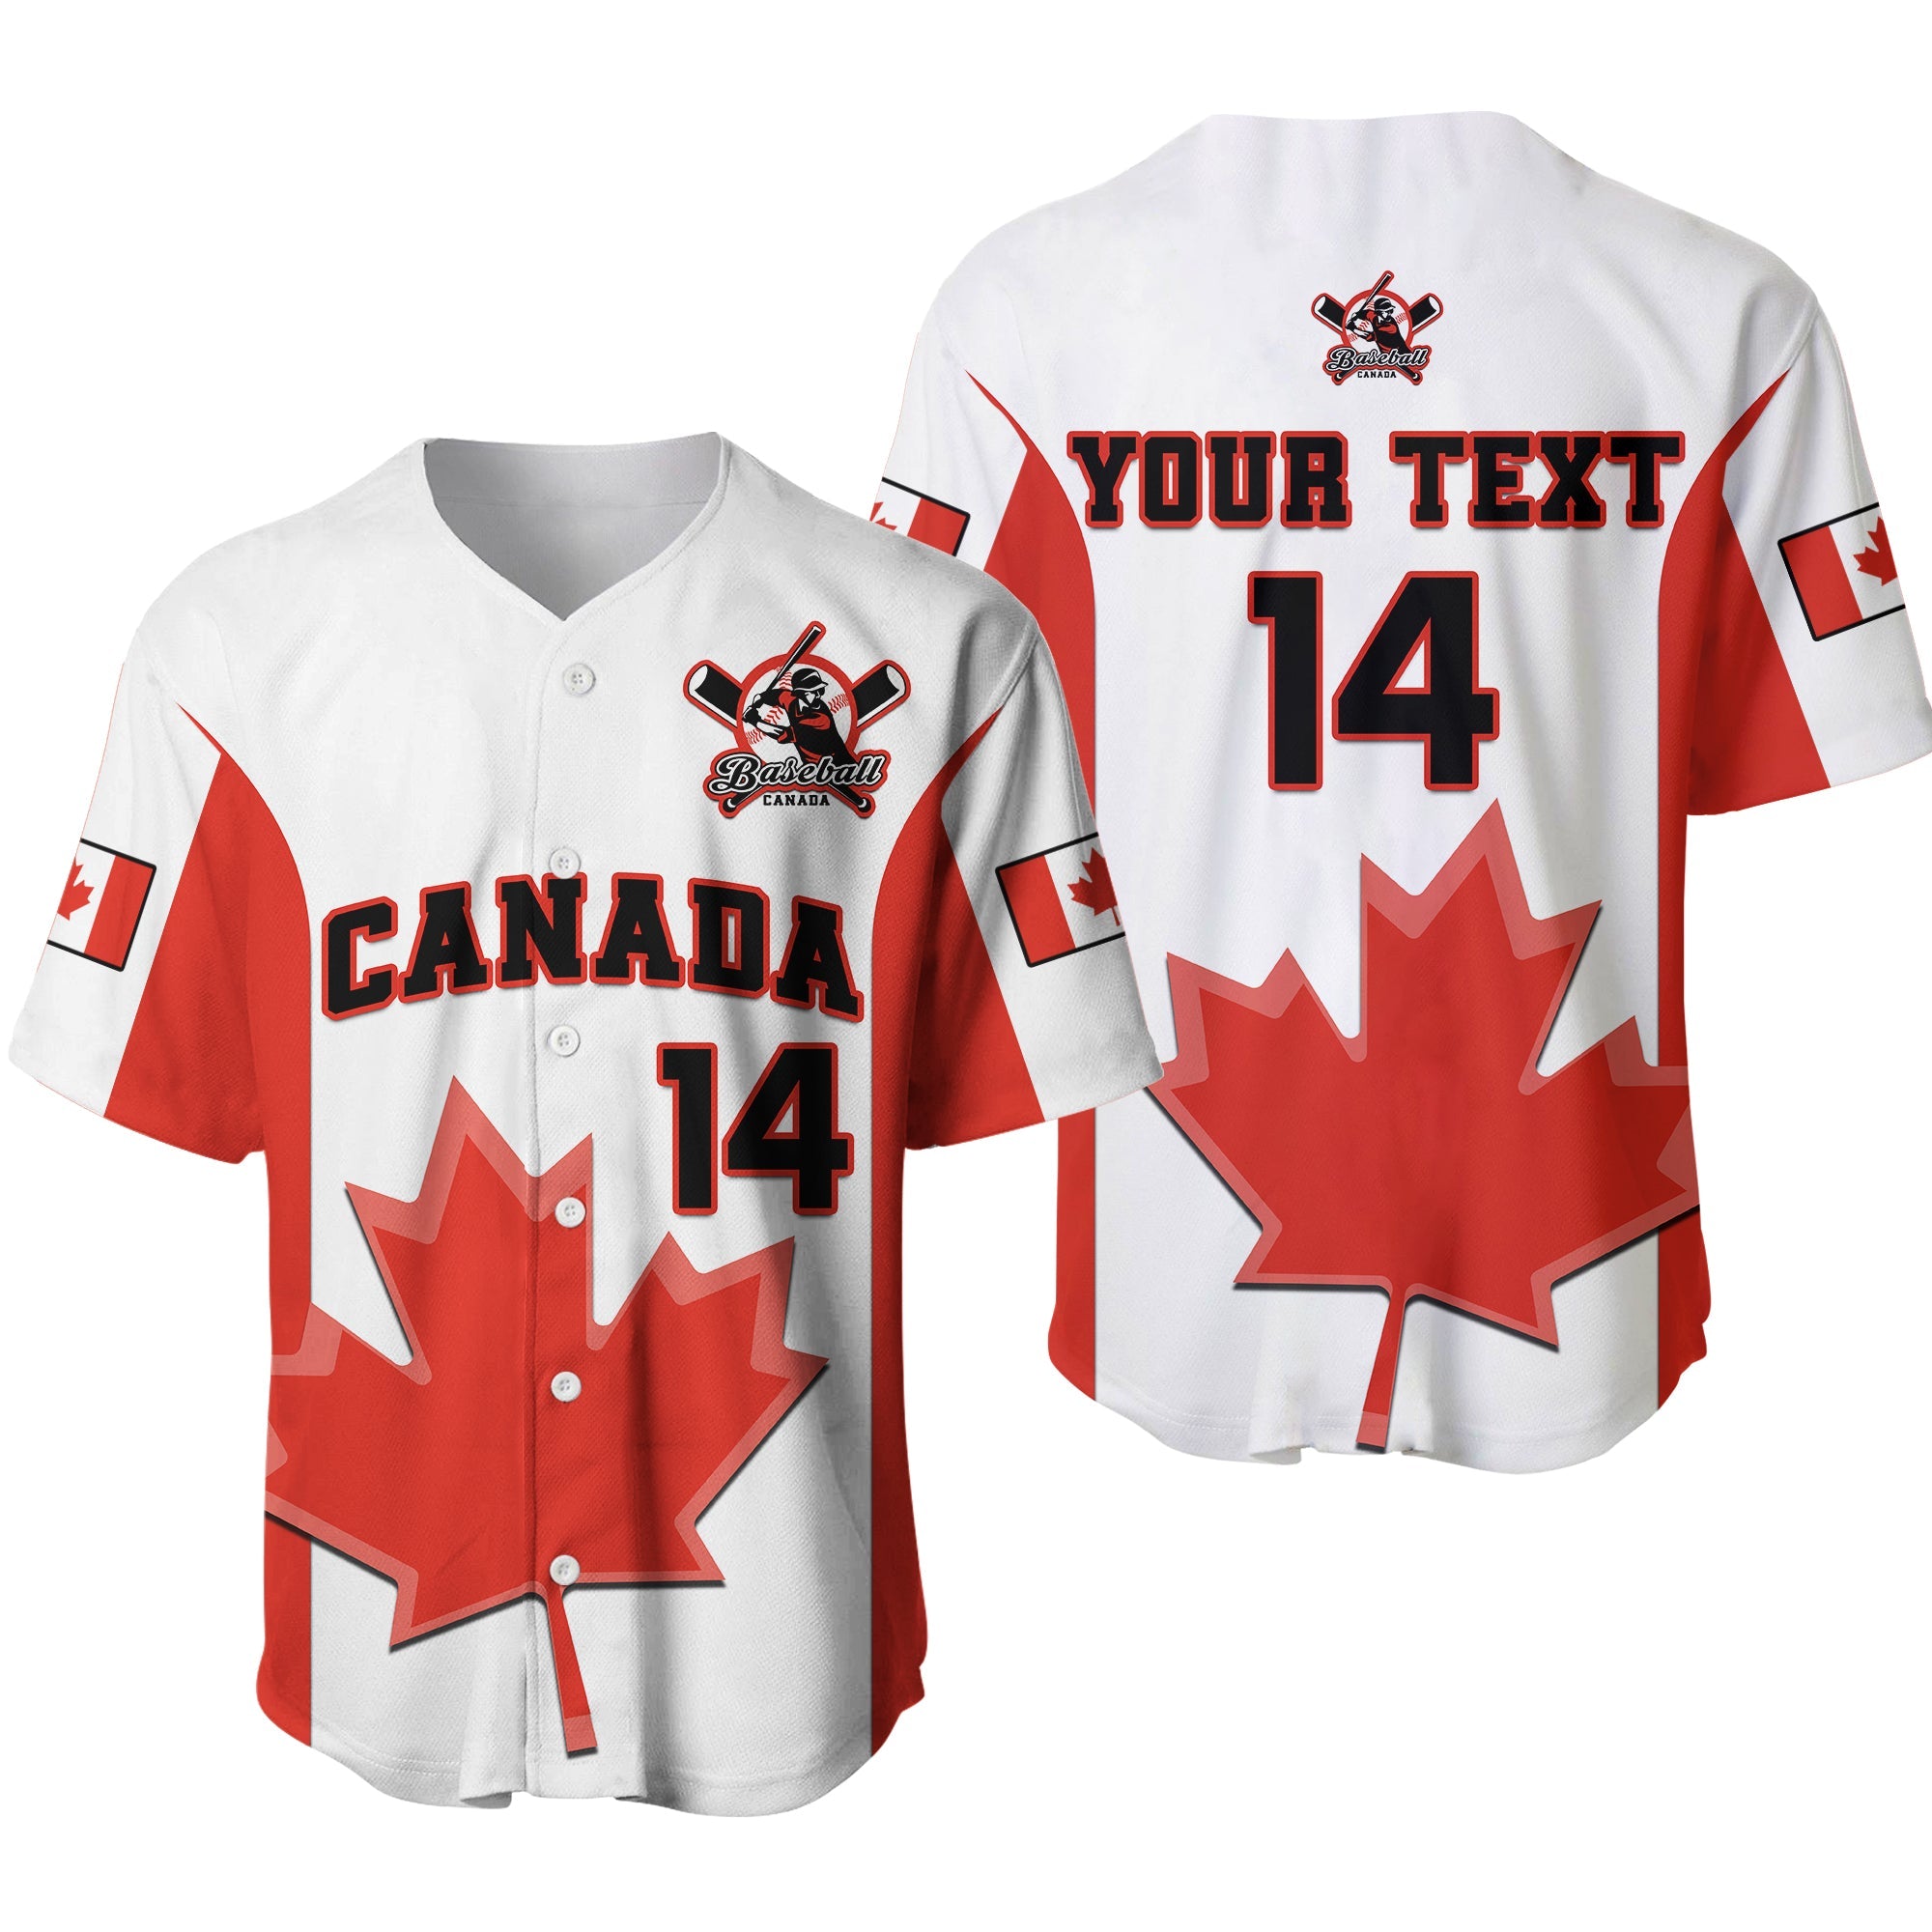 custom-text-and-number-canada-baseball-2023-baseball-jersey-canadian-maple-leaf-sporty-ver01